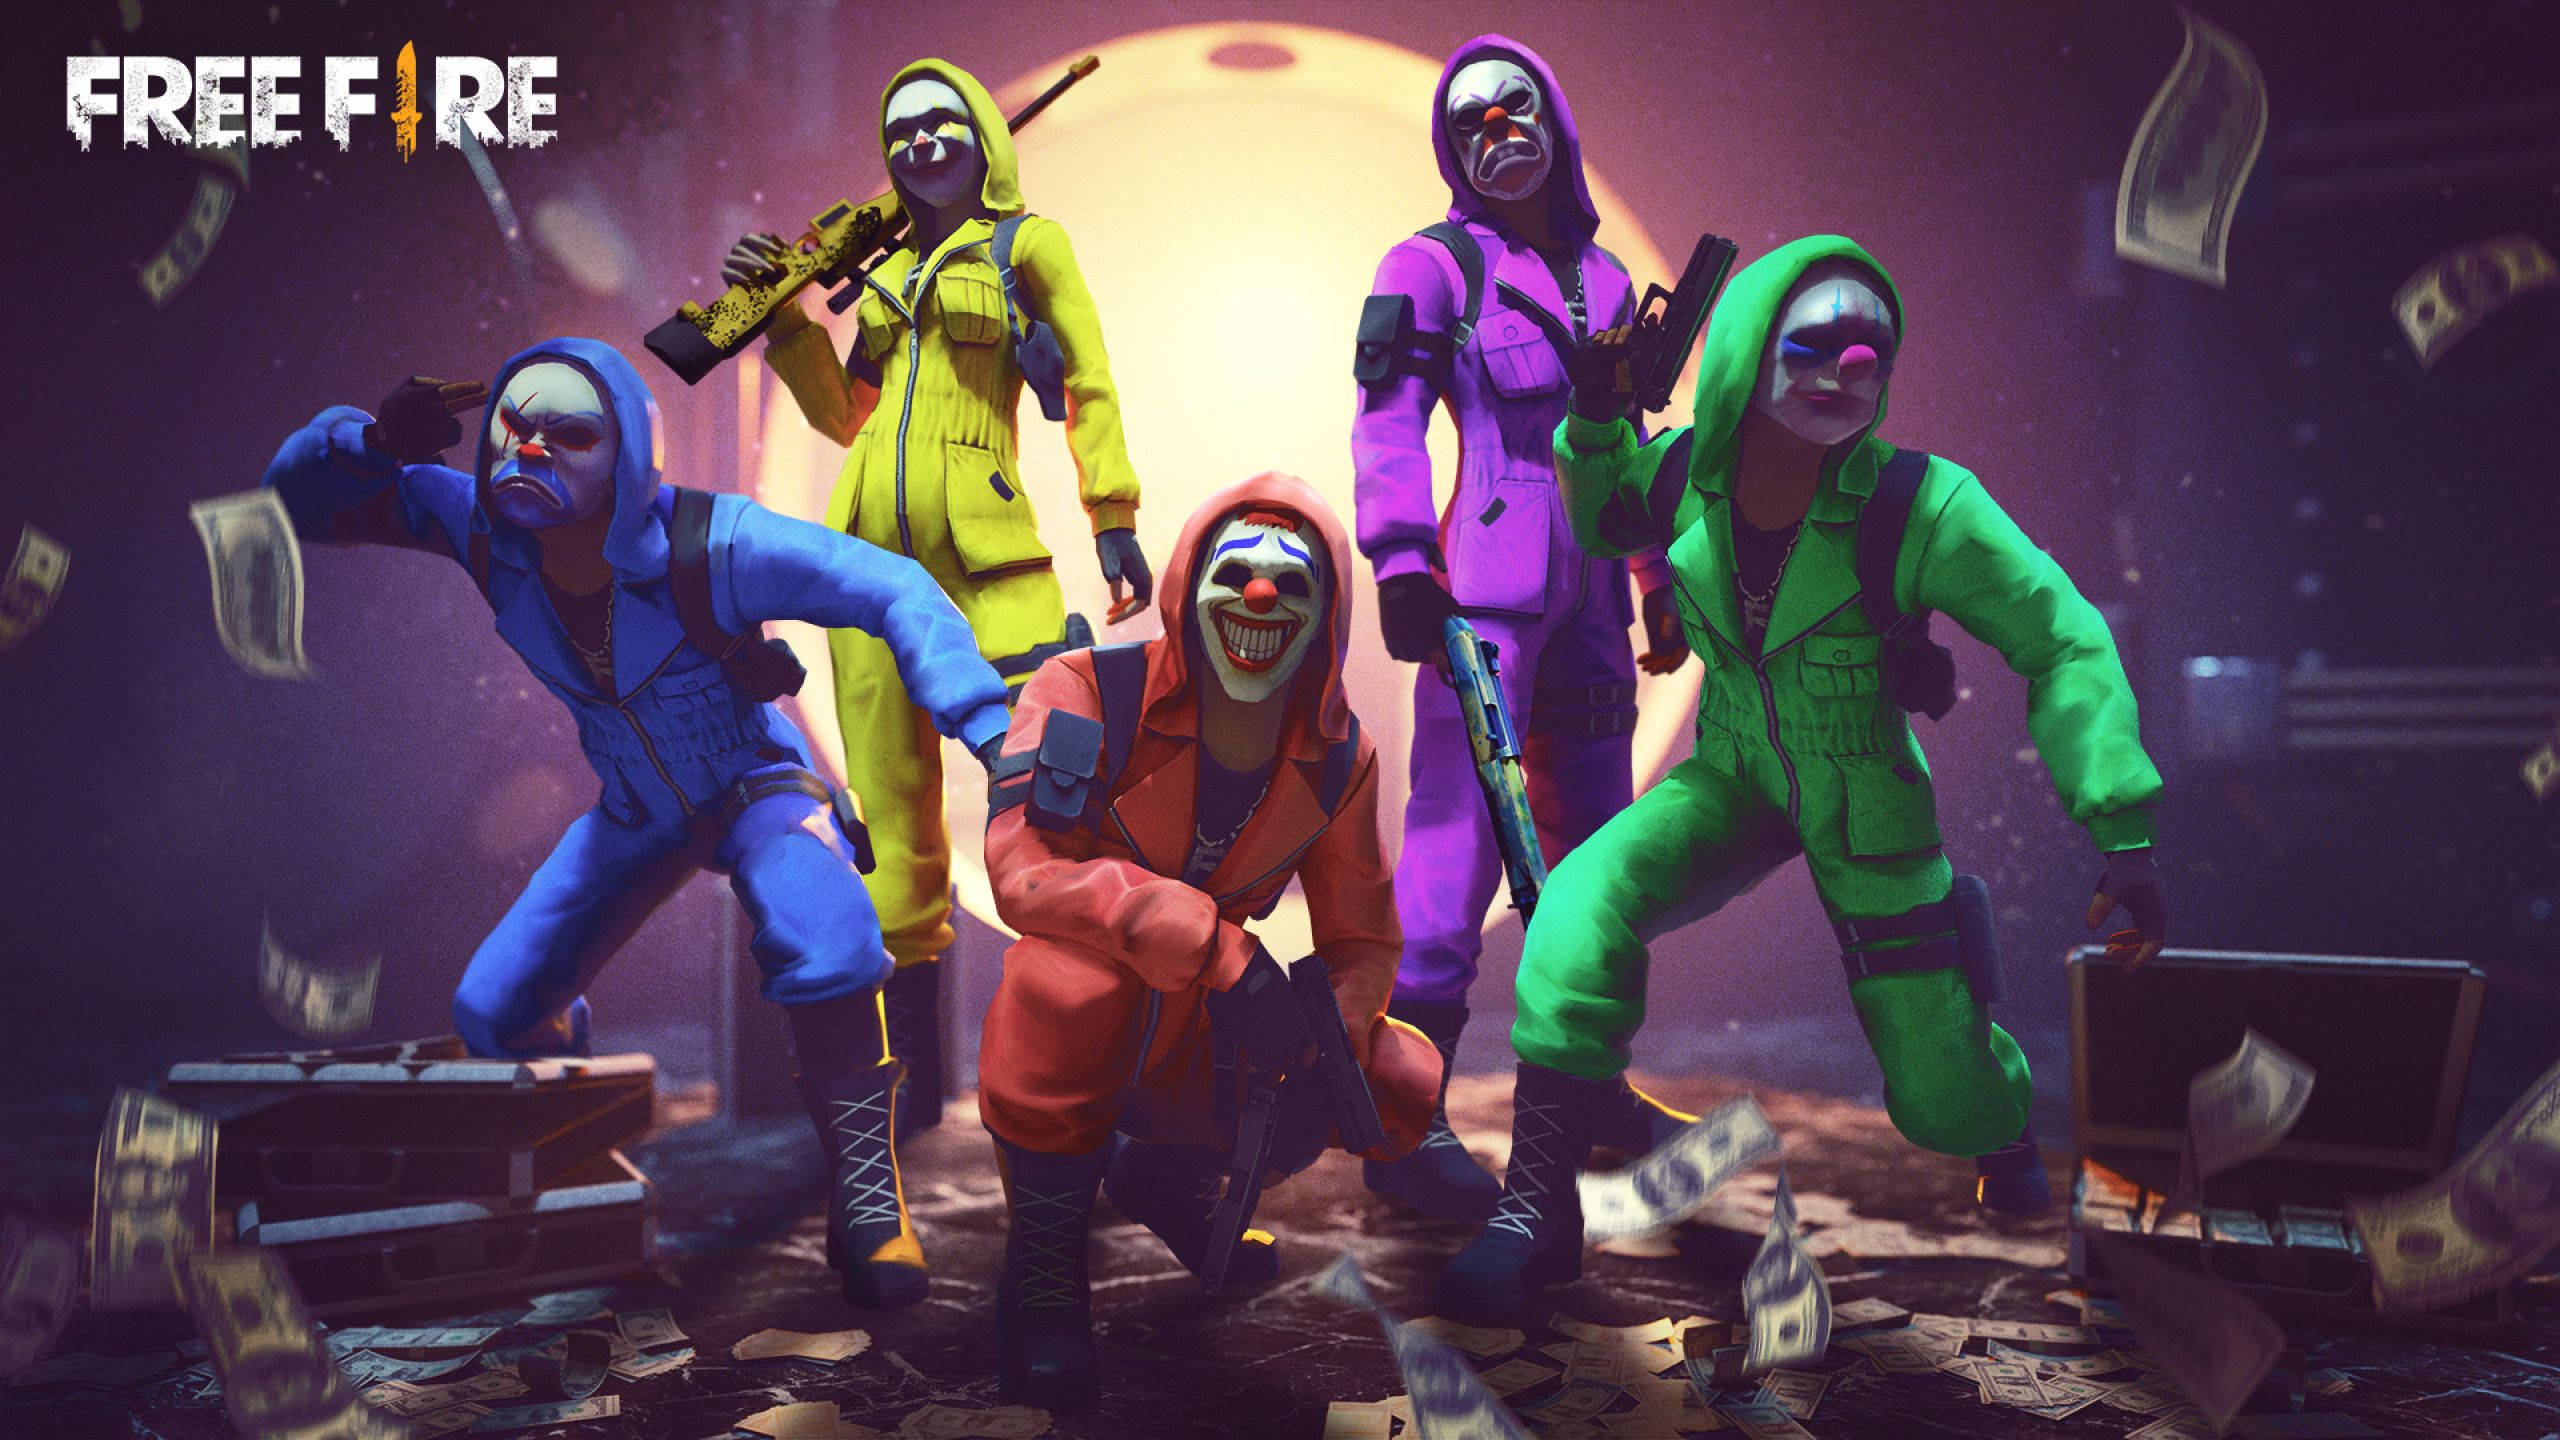 An Intense Gaming Universe Captured In 2560x1440 High-resolution Featuring The Free Fire Criminal Bundle. Background